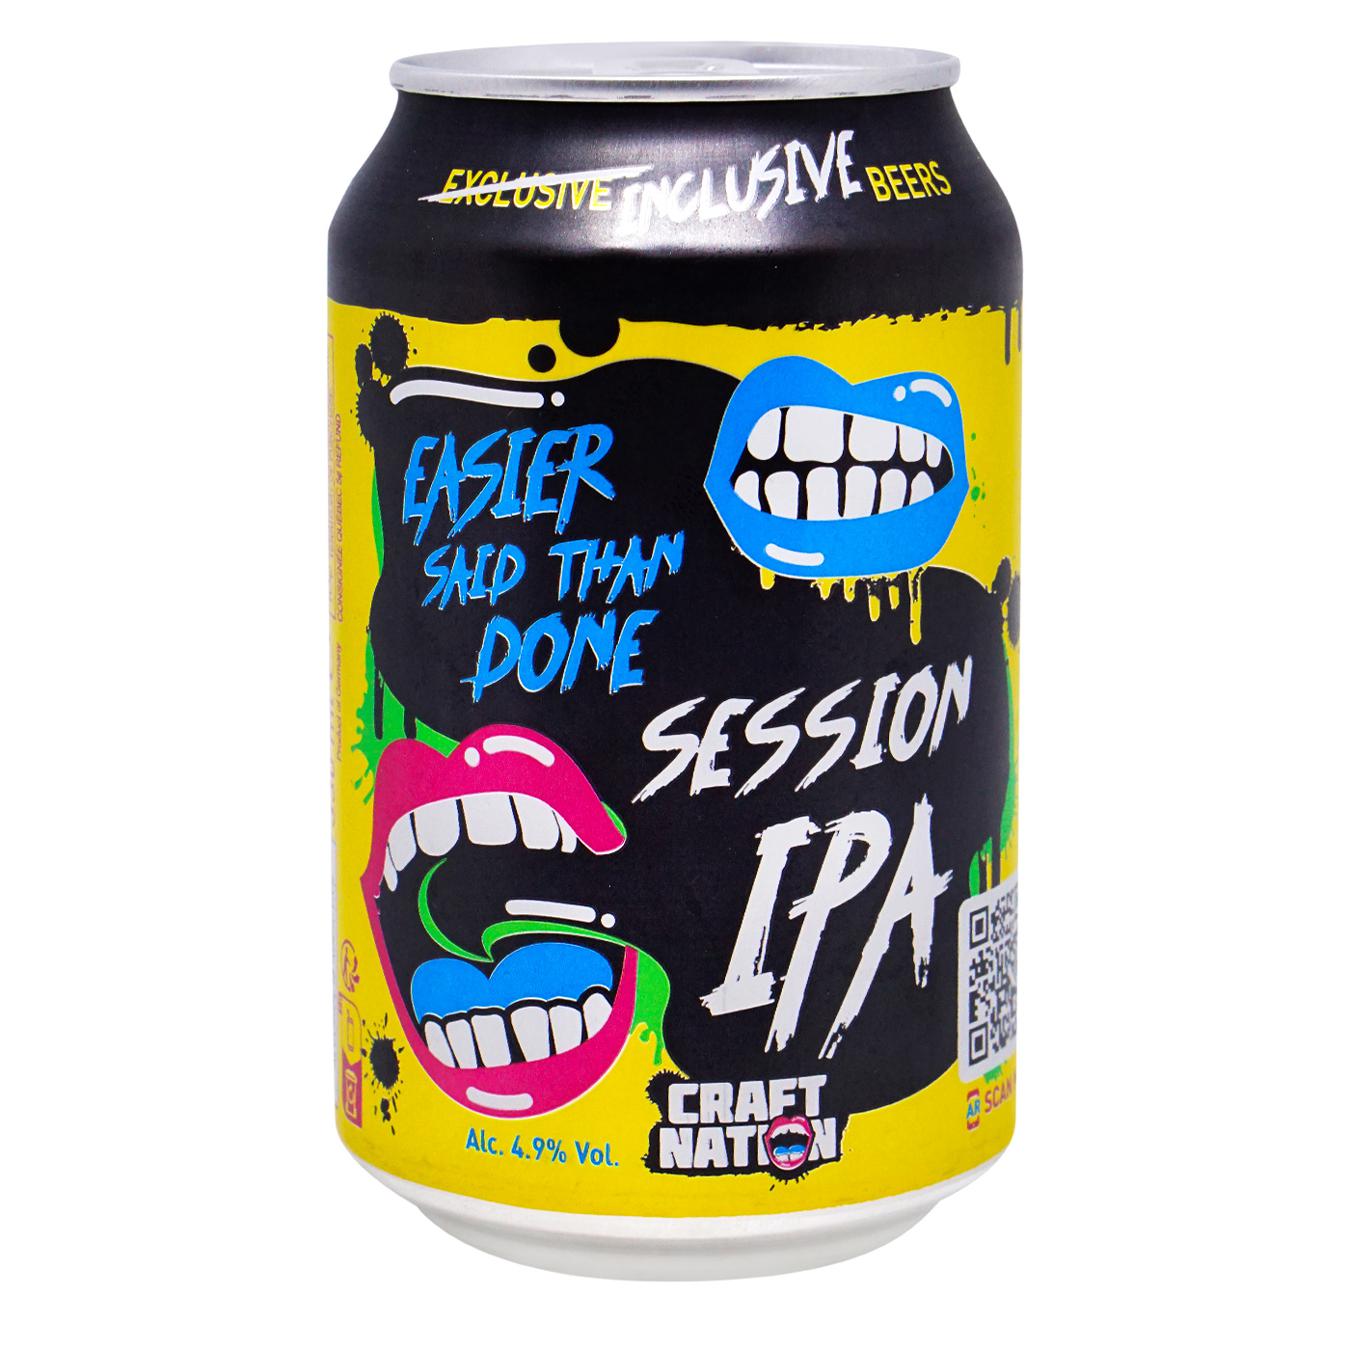 Light beer Craft Nation Session IPA 4.9% 0.33l iron can